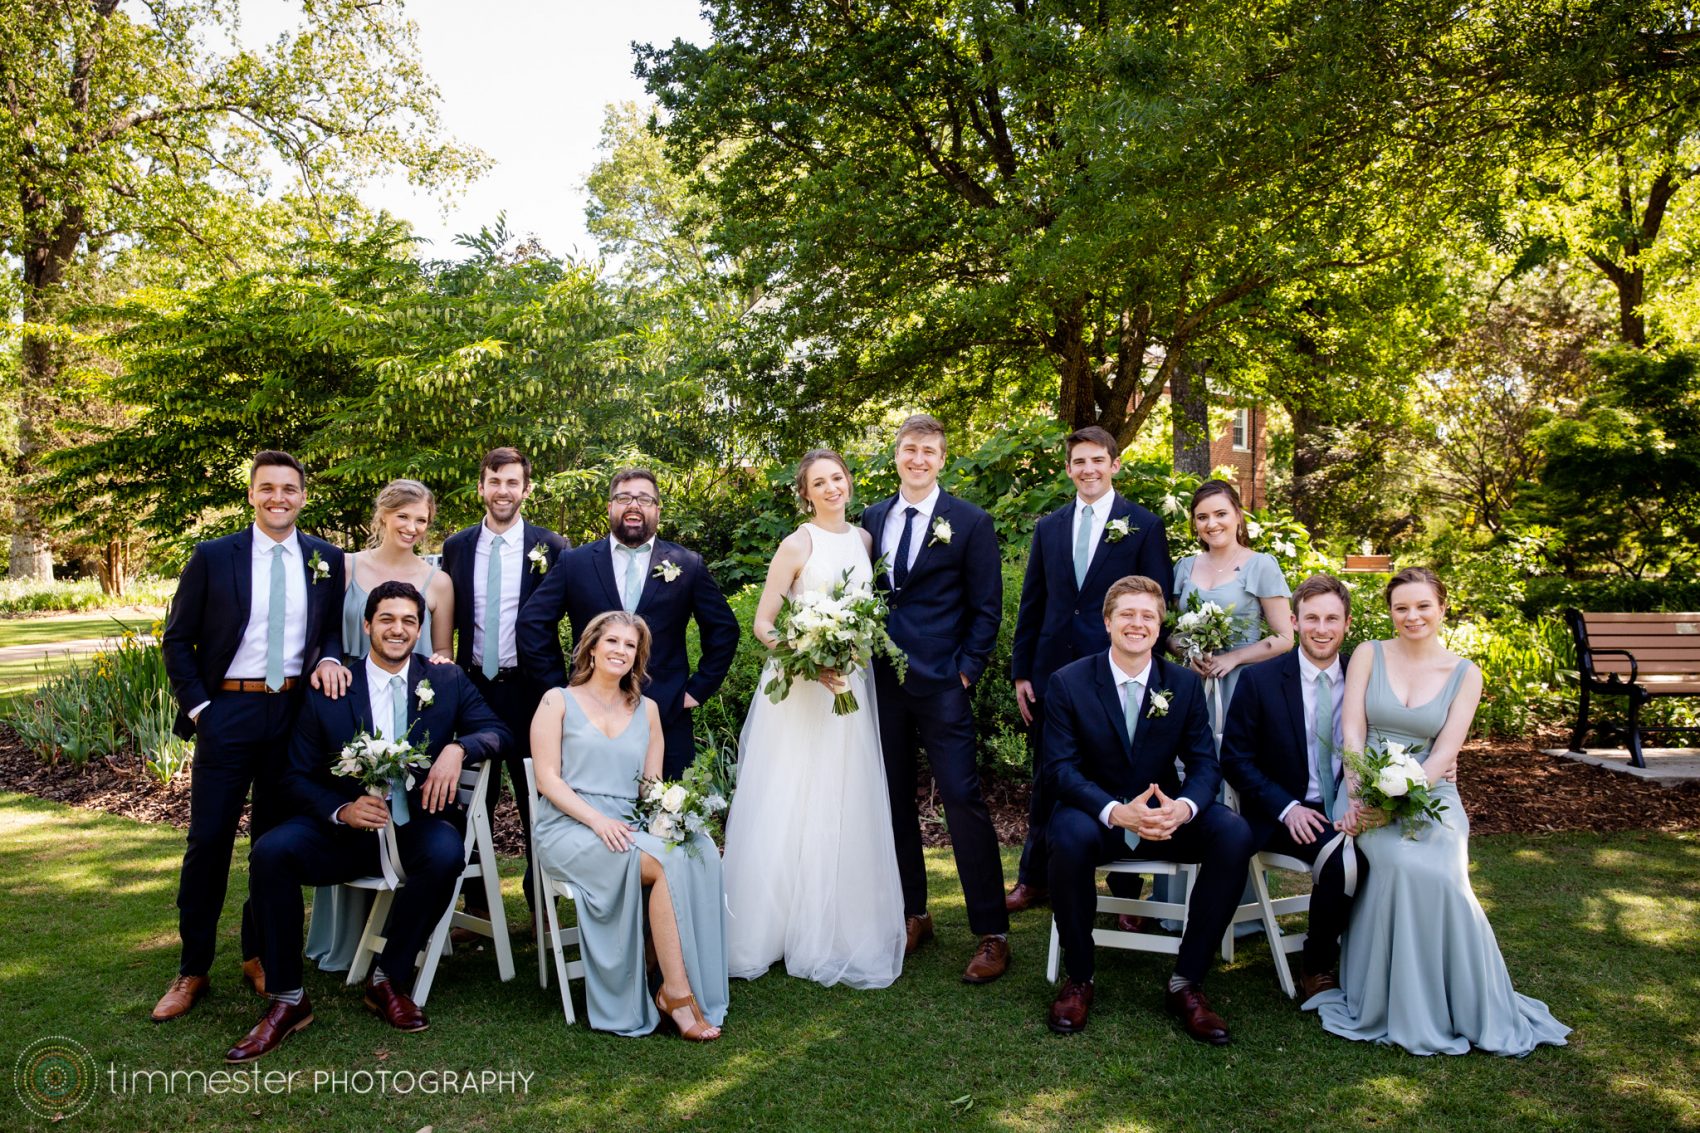 A fabulous wedding party and bridal party at Fred Fletcher Park in Raleigh, North Carolina.